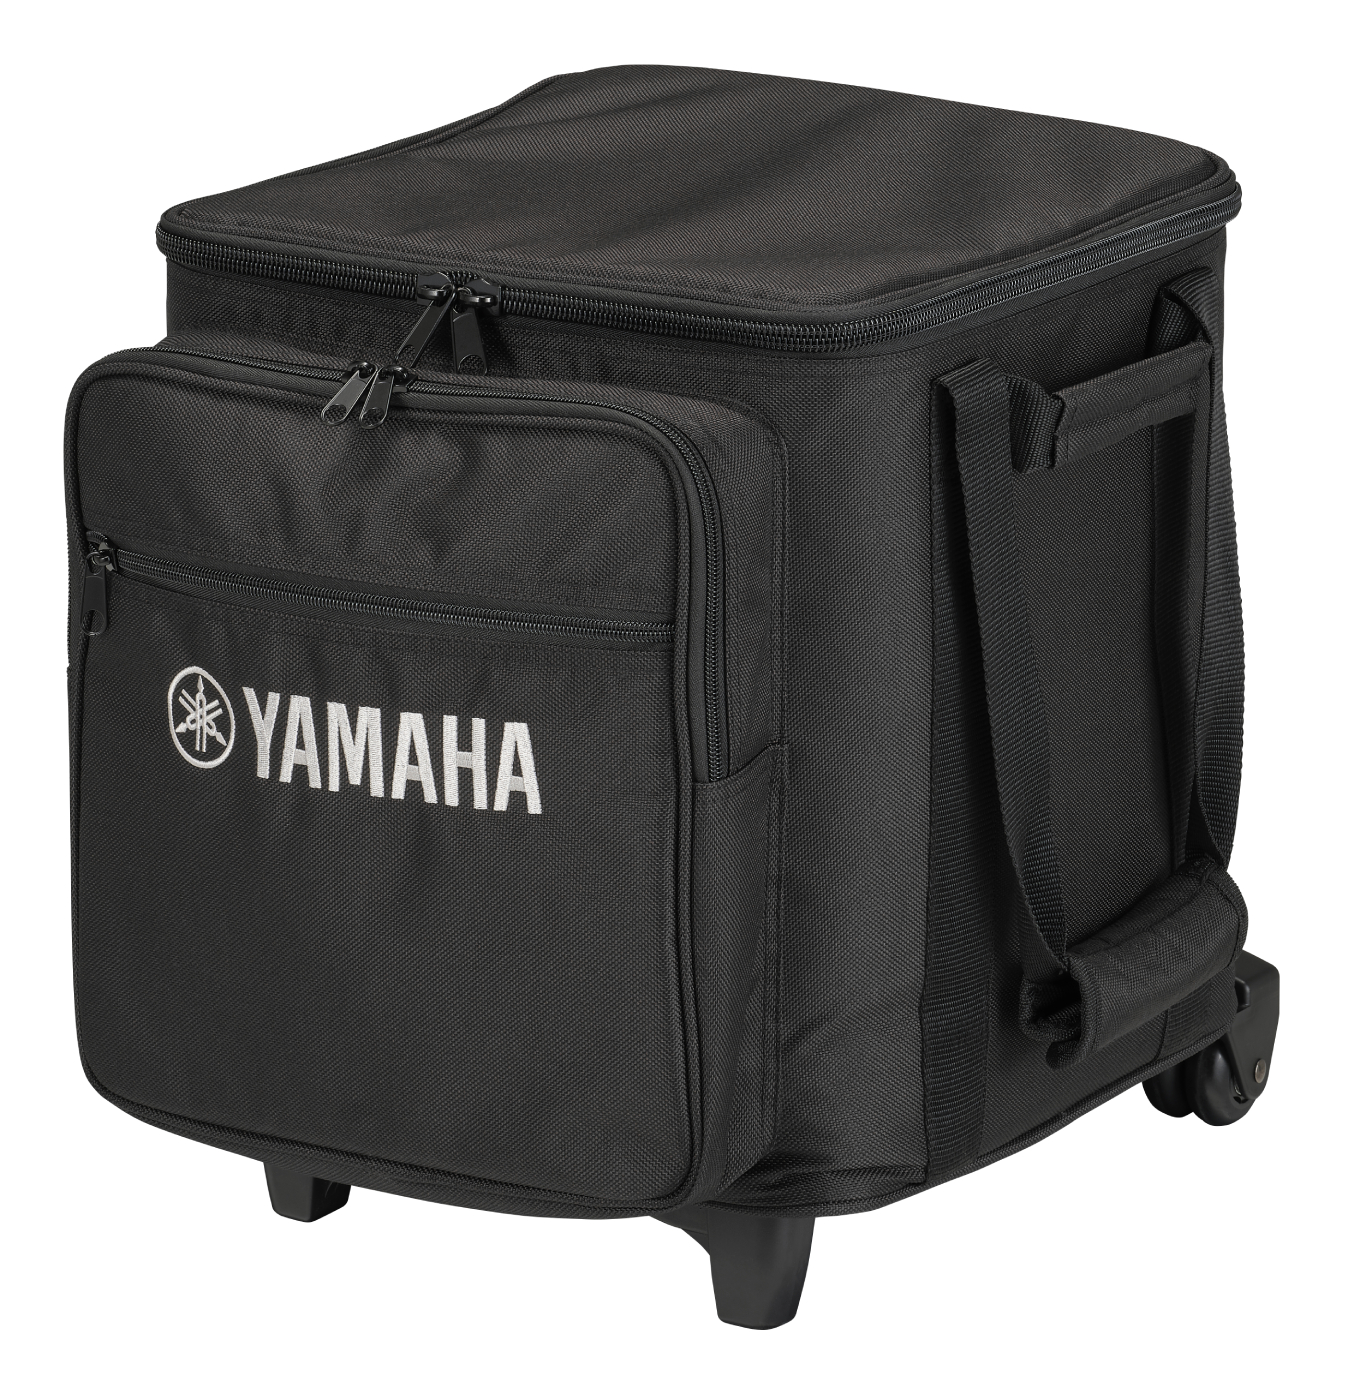 Yamaha Stagepas 200  + Valise Pour Stagepas 200 - Pa systeem set - Variation 2